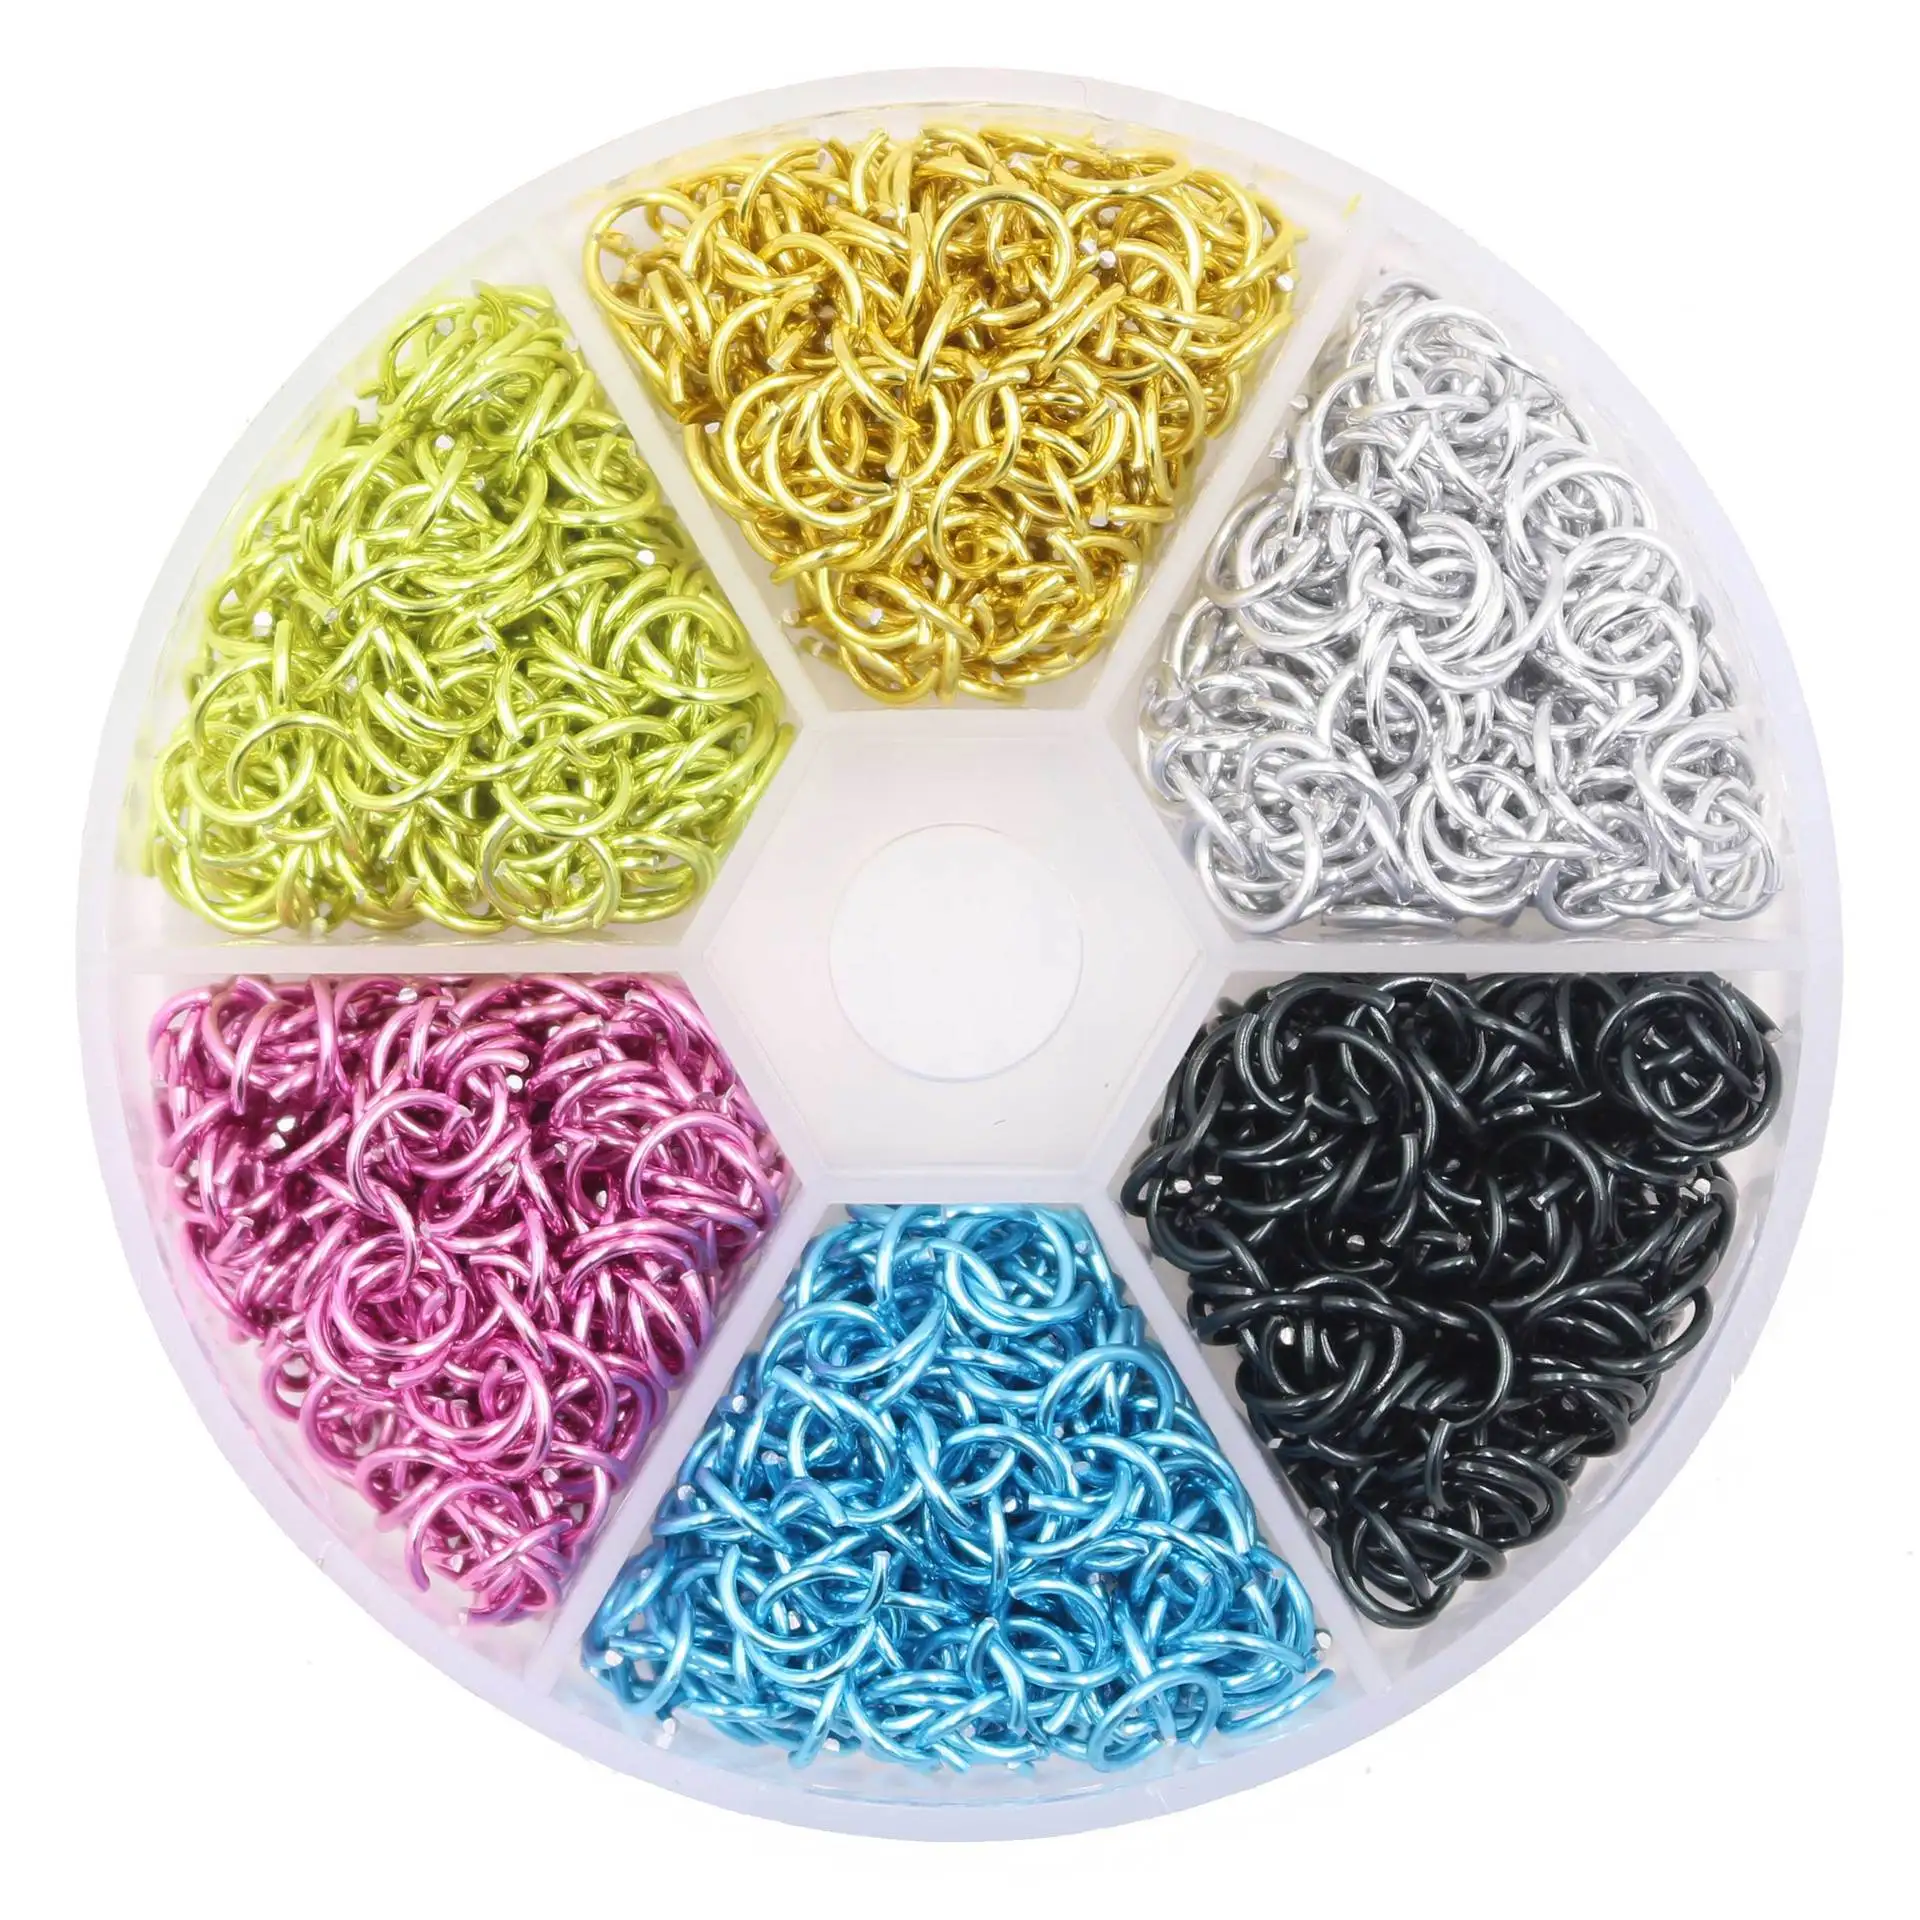 

1080 PCS Nails Pierced Arylictips Punk Charms Loops Metal Piercing Jewelry Connect Hoop Decoration Nail Art Alloy Ring 5-6mm